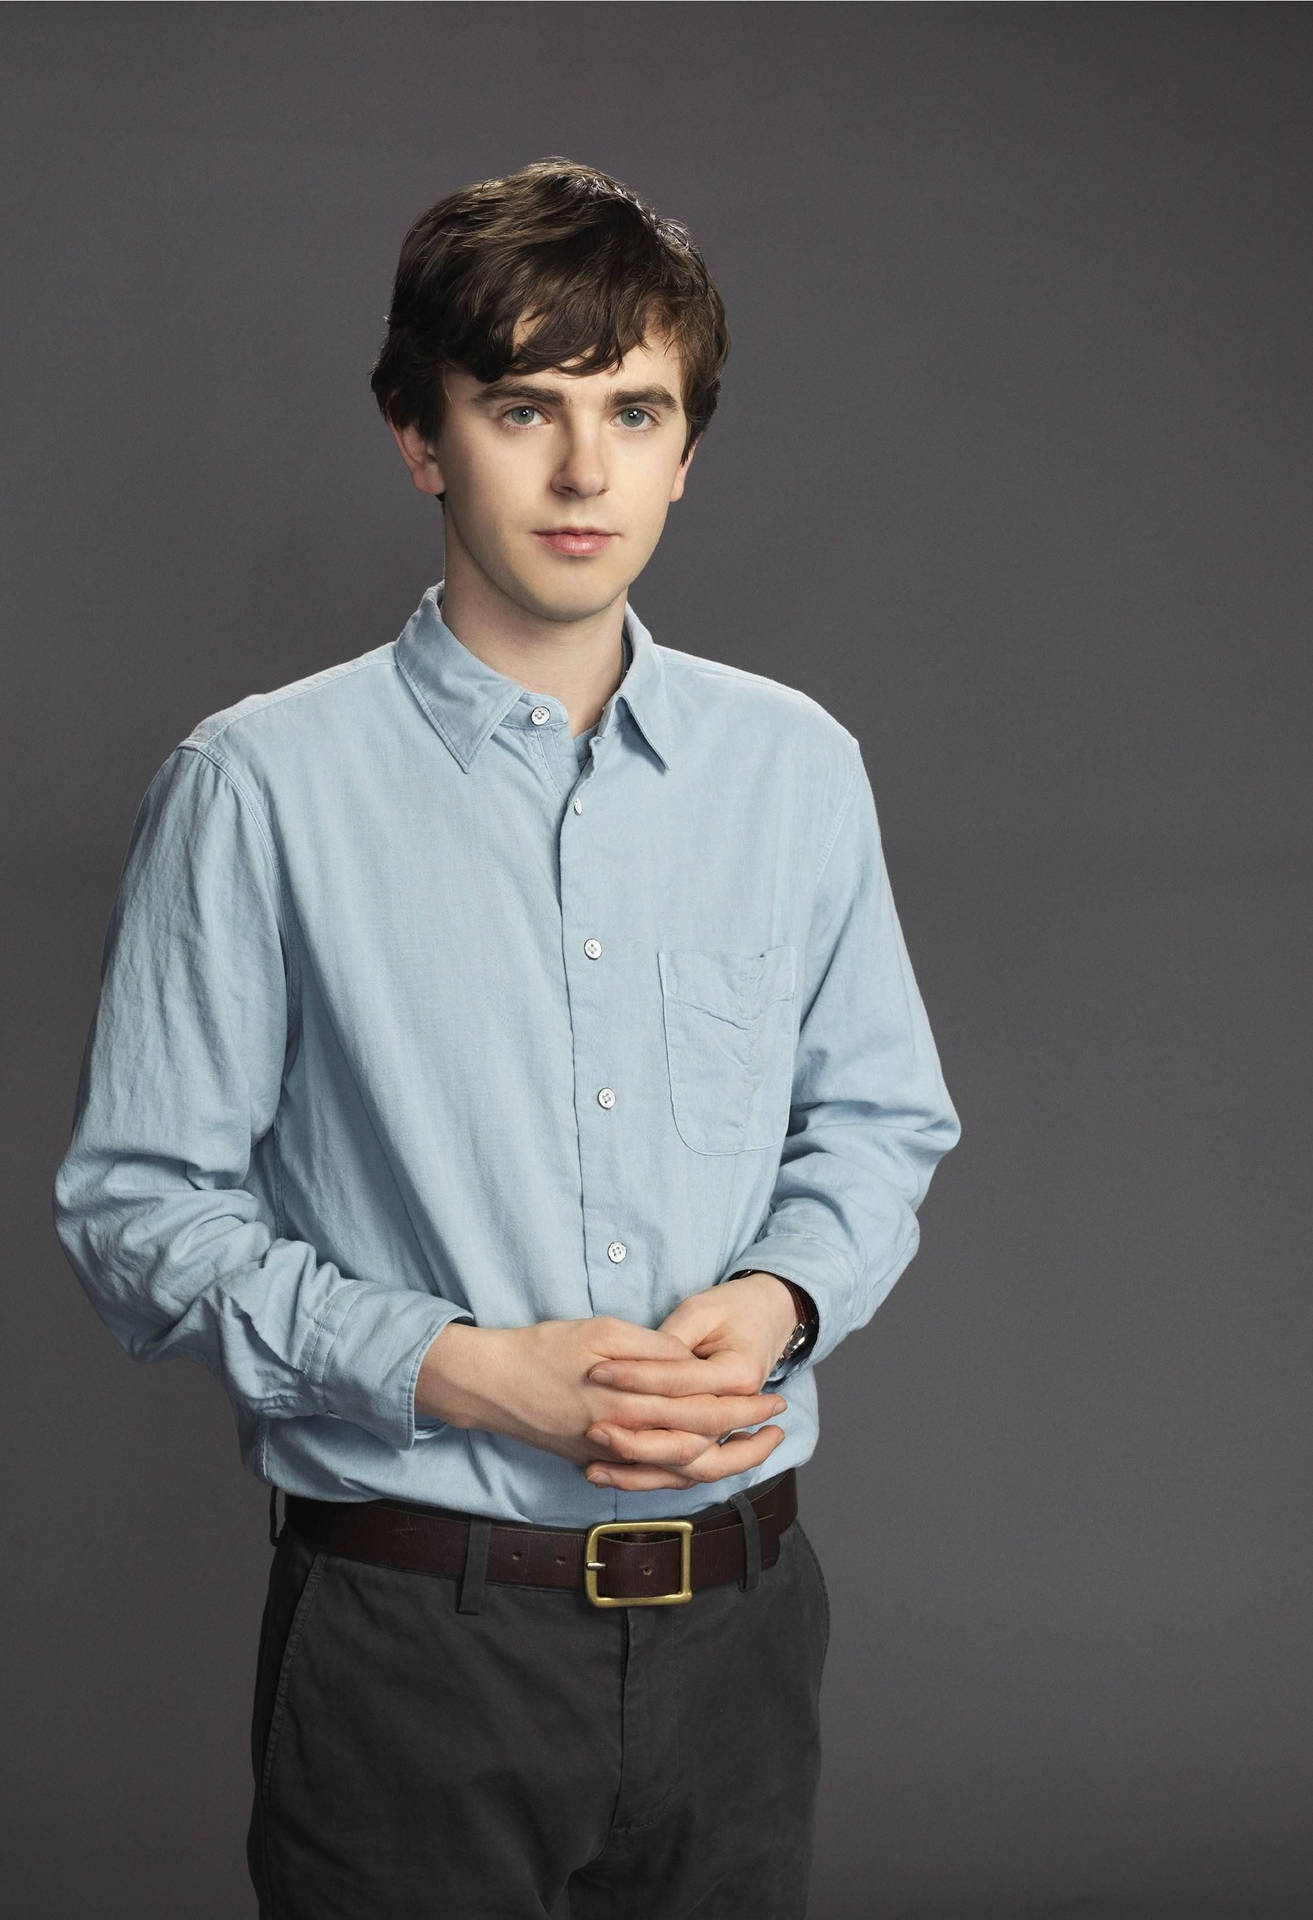 The Good Doctor Freddie Highmore